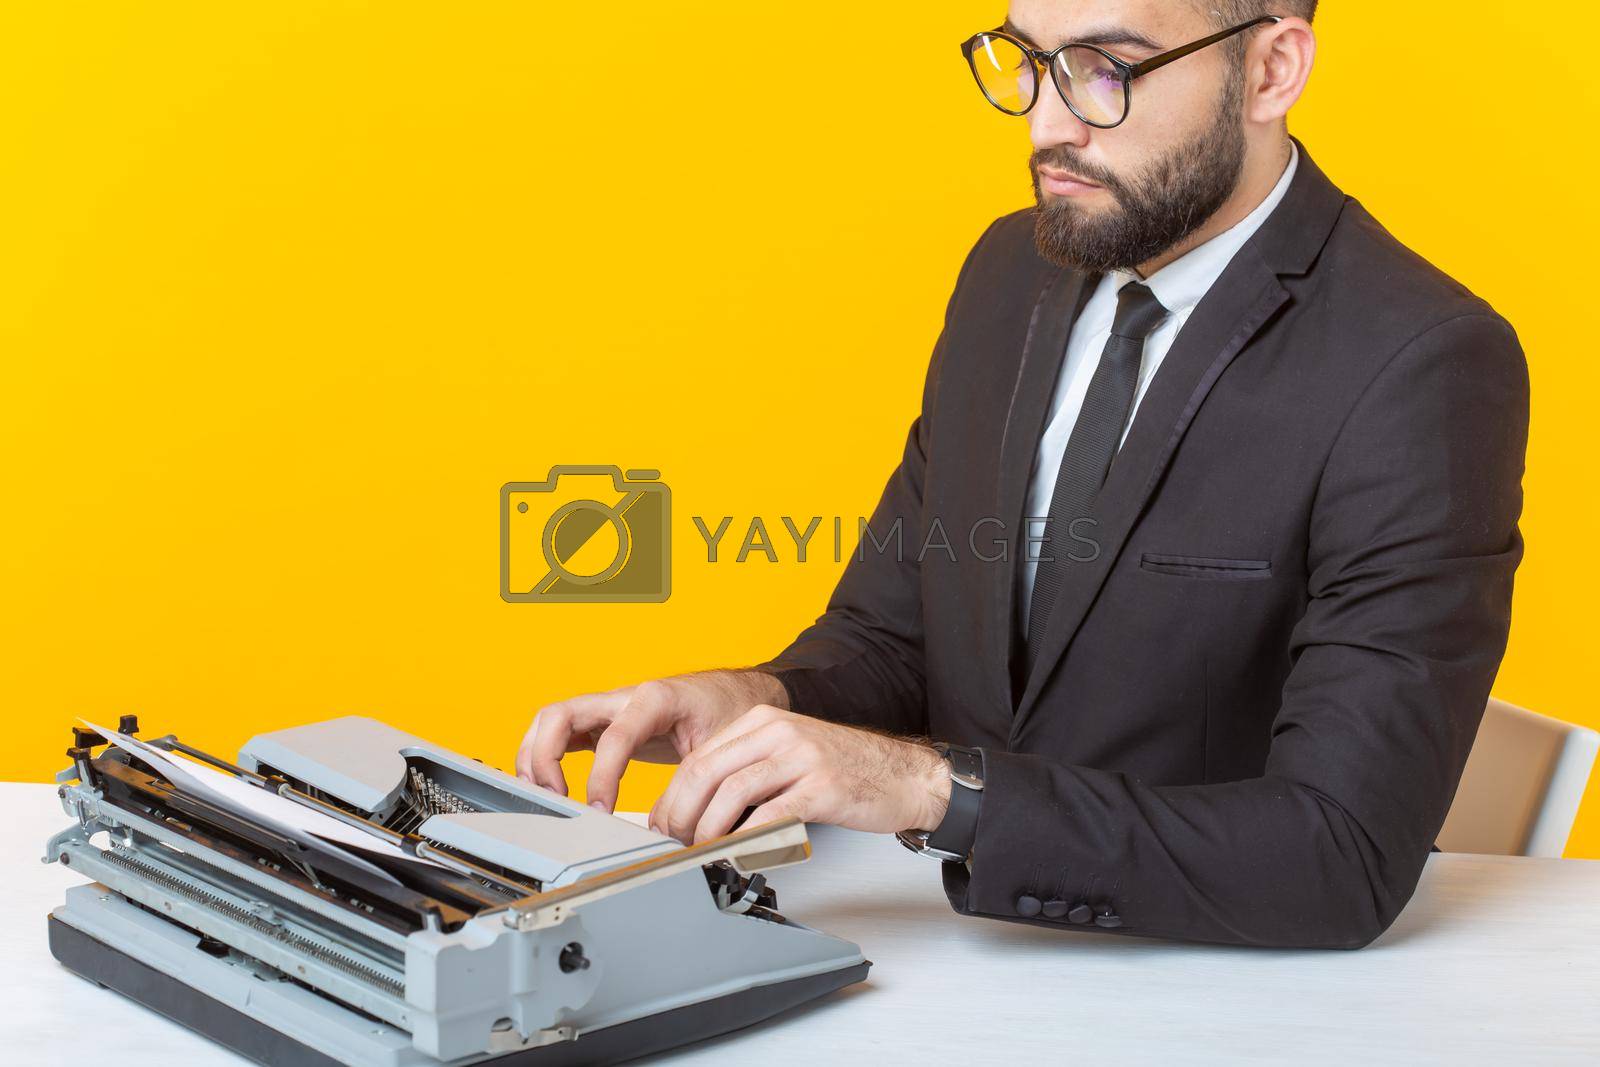 Royalty free image of Side view of a young charming male businessman in formal attire and glasses typing on a typewriter text. Concept of business affairs and ideas. by Satura86